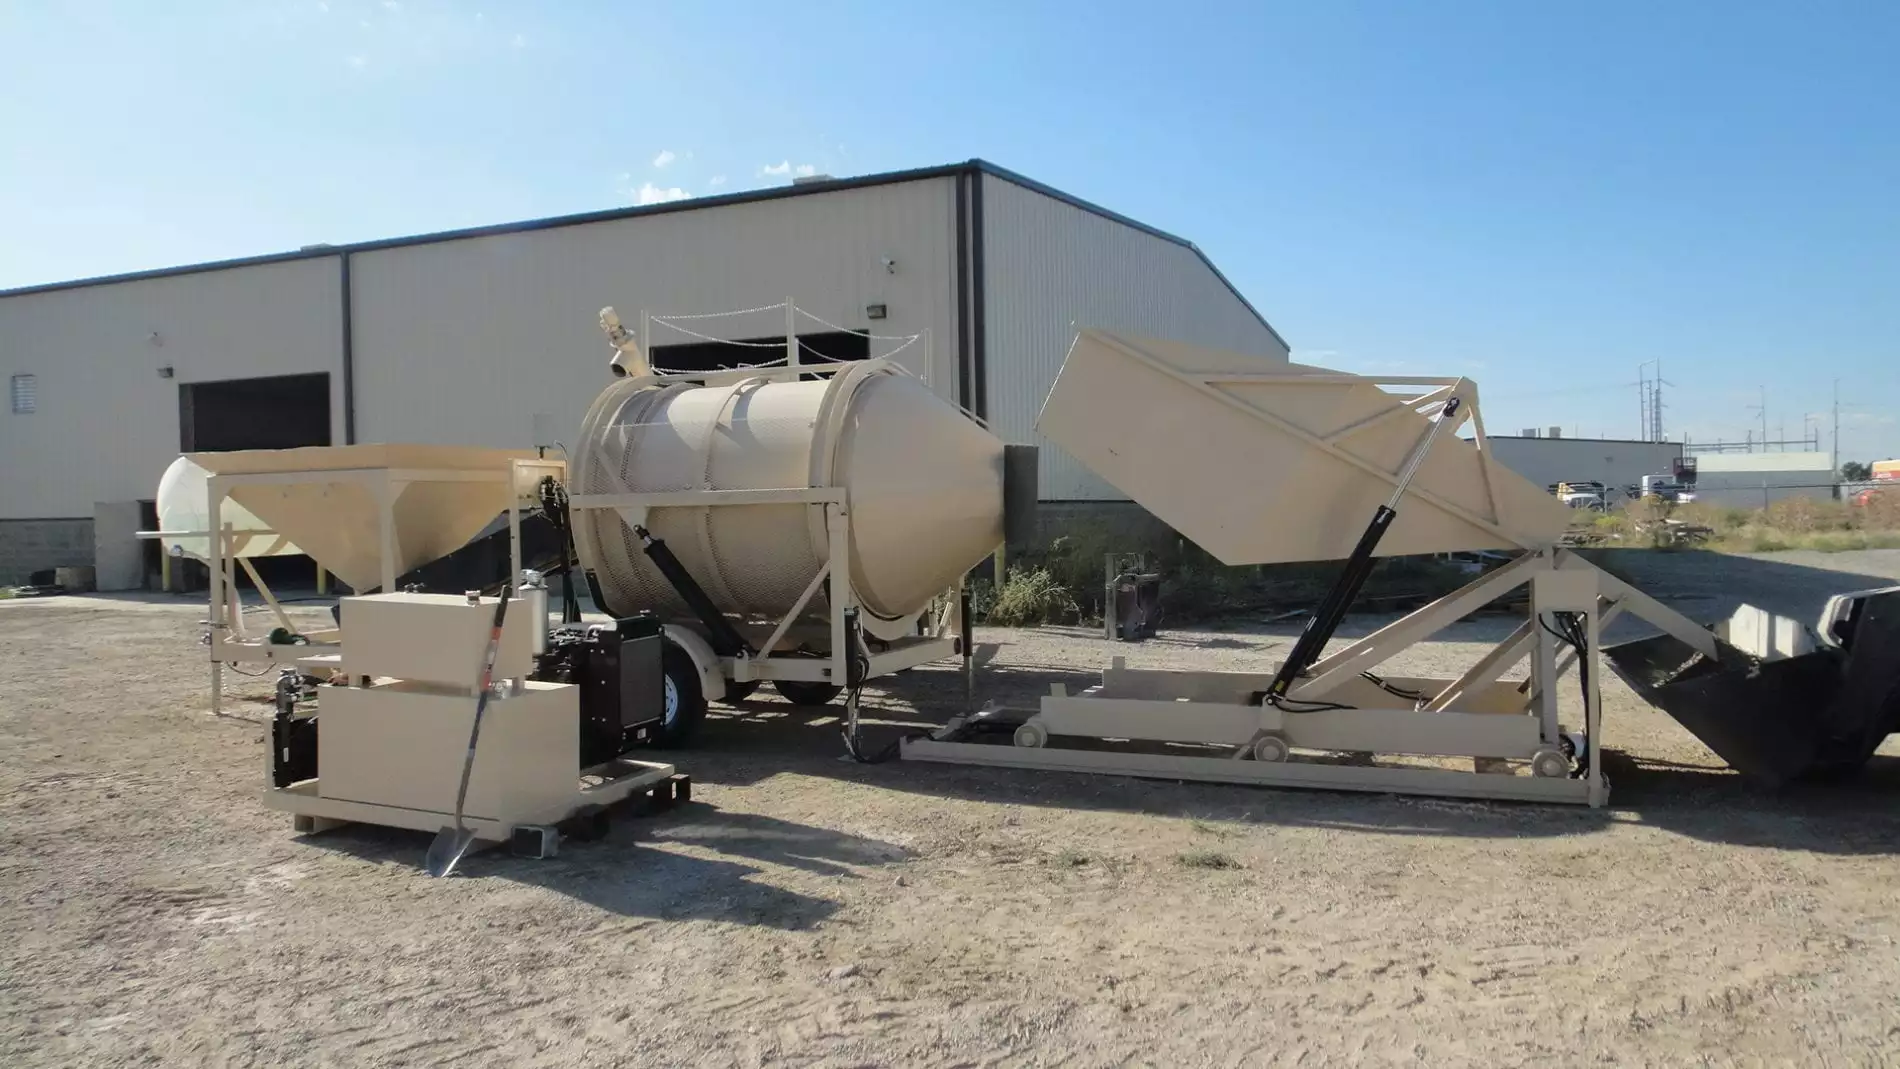 Custom Portable Concrete Mixer Batching Plant 2 1/2 Cubic Yards Mix Right EZ 2-3 with HH3 Holding Hopper at Right Manufacturing Systems Inc.